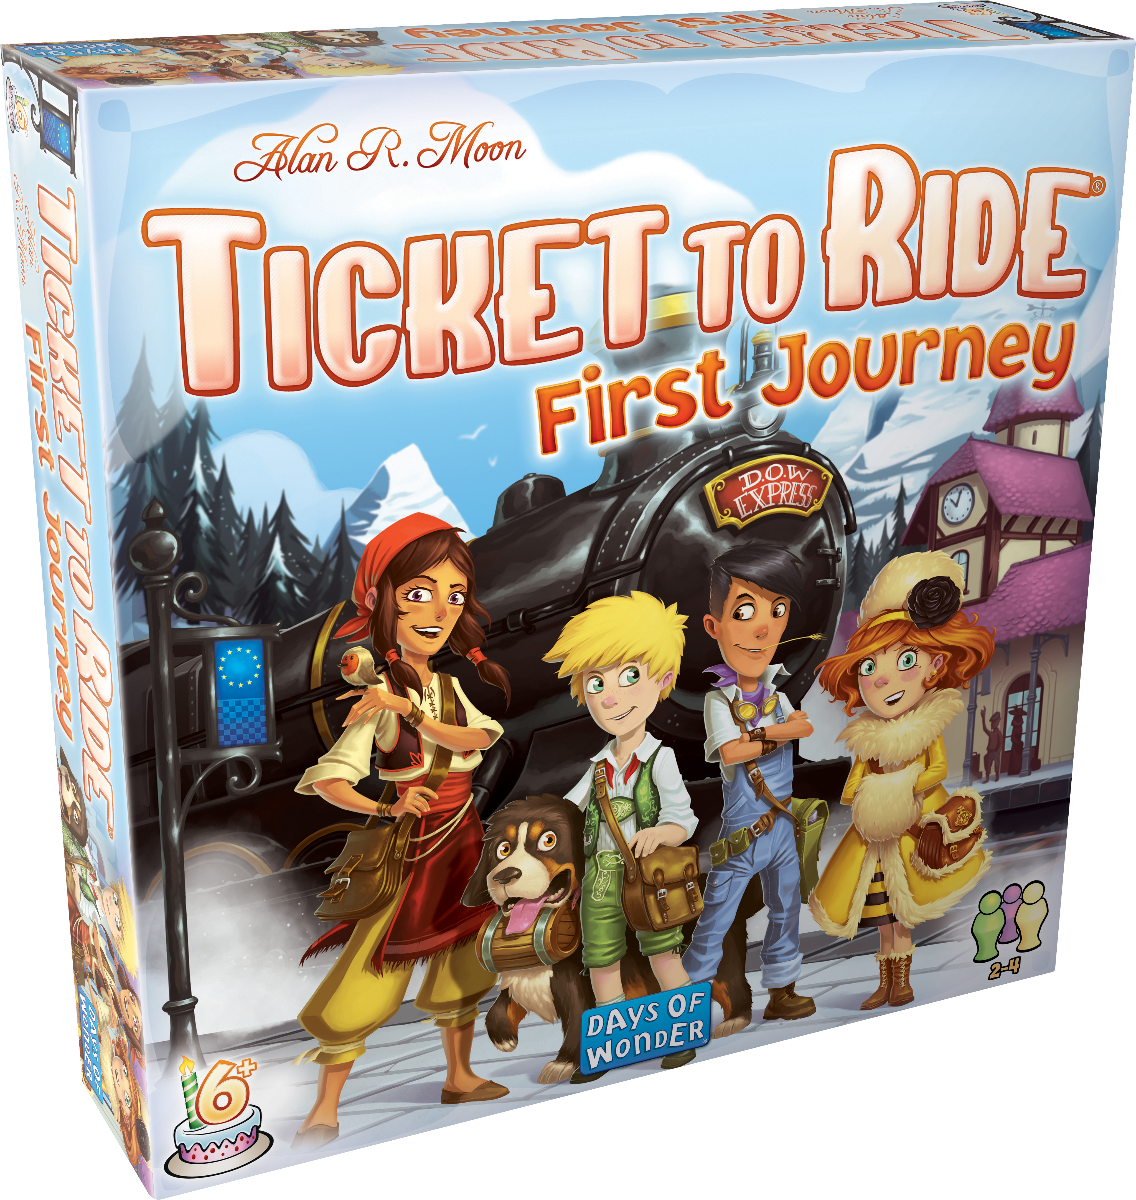 Ticket to ride 1st journey europe